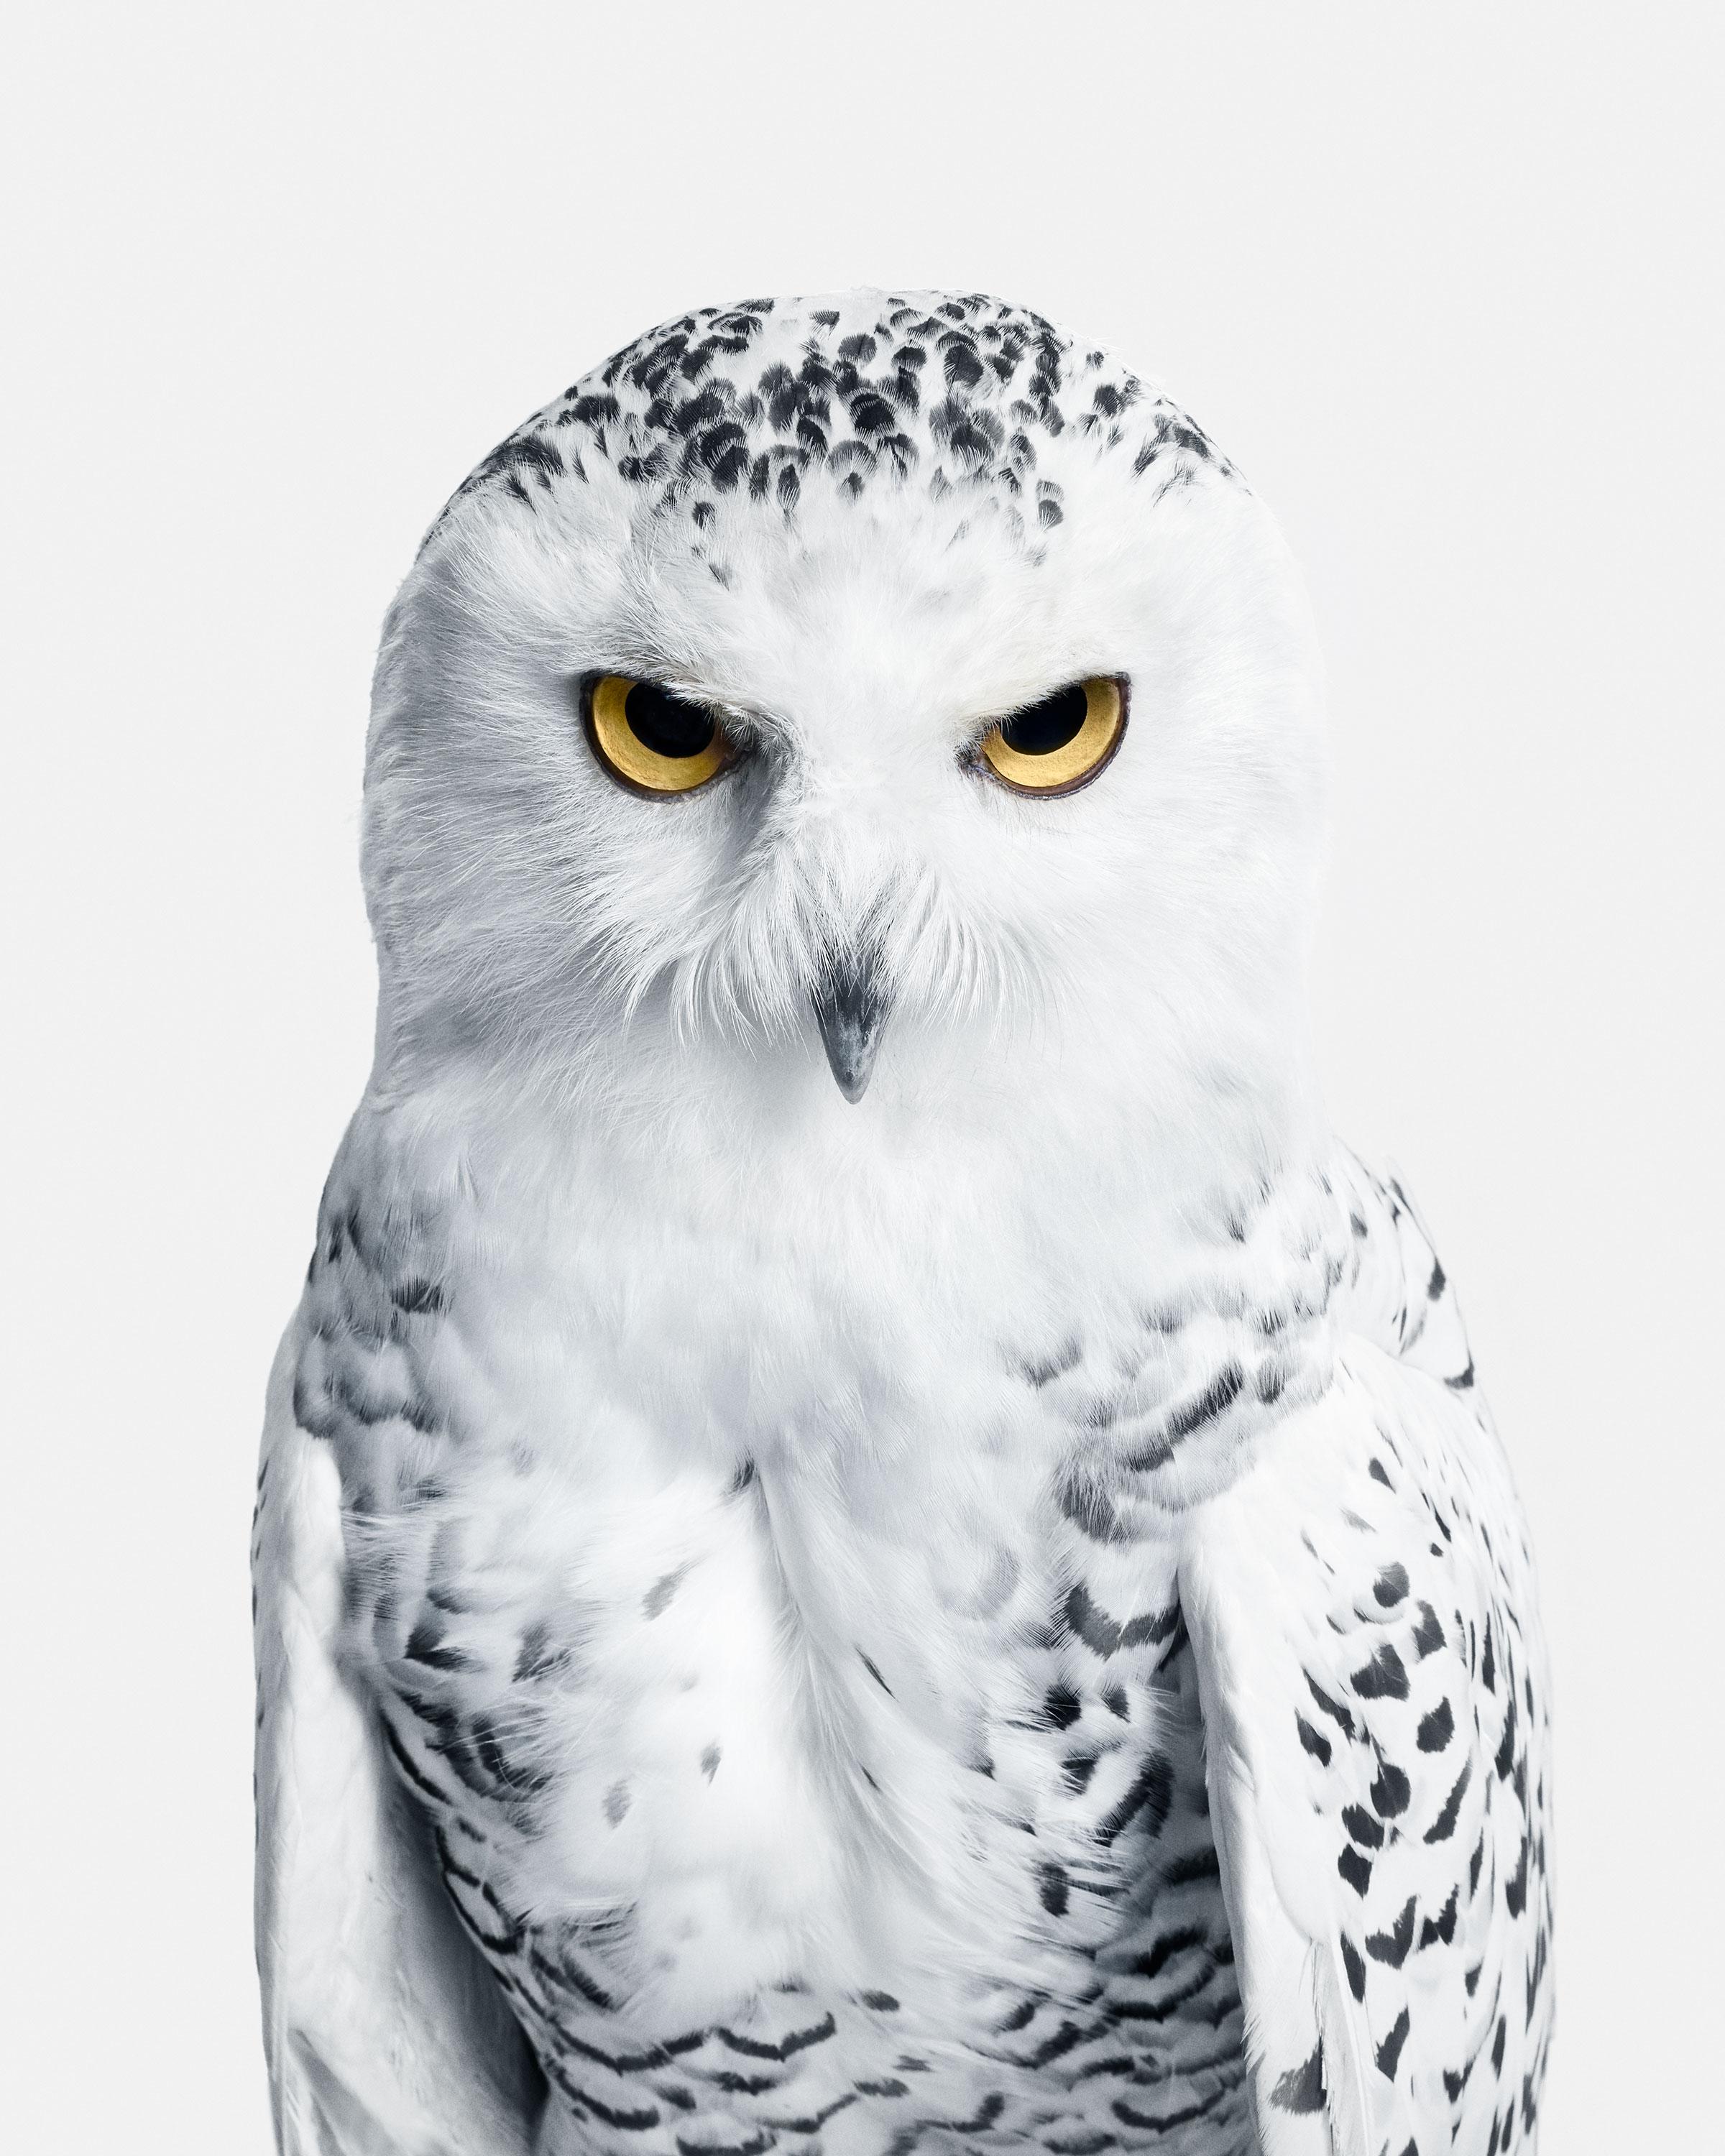 Randal Ford Color Photograph - Snowy Owl No. 3 (50" x 40")